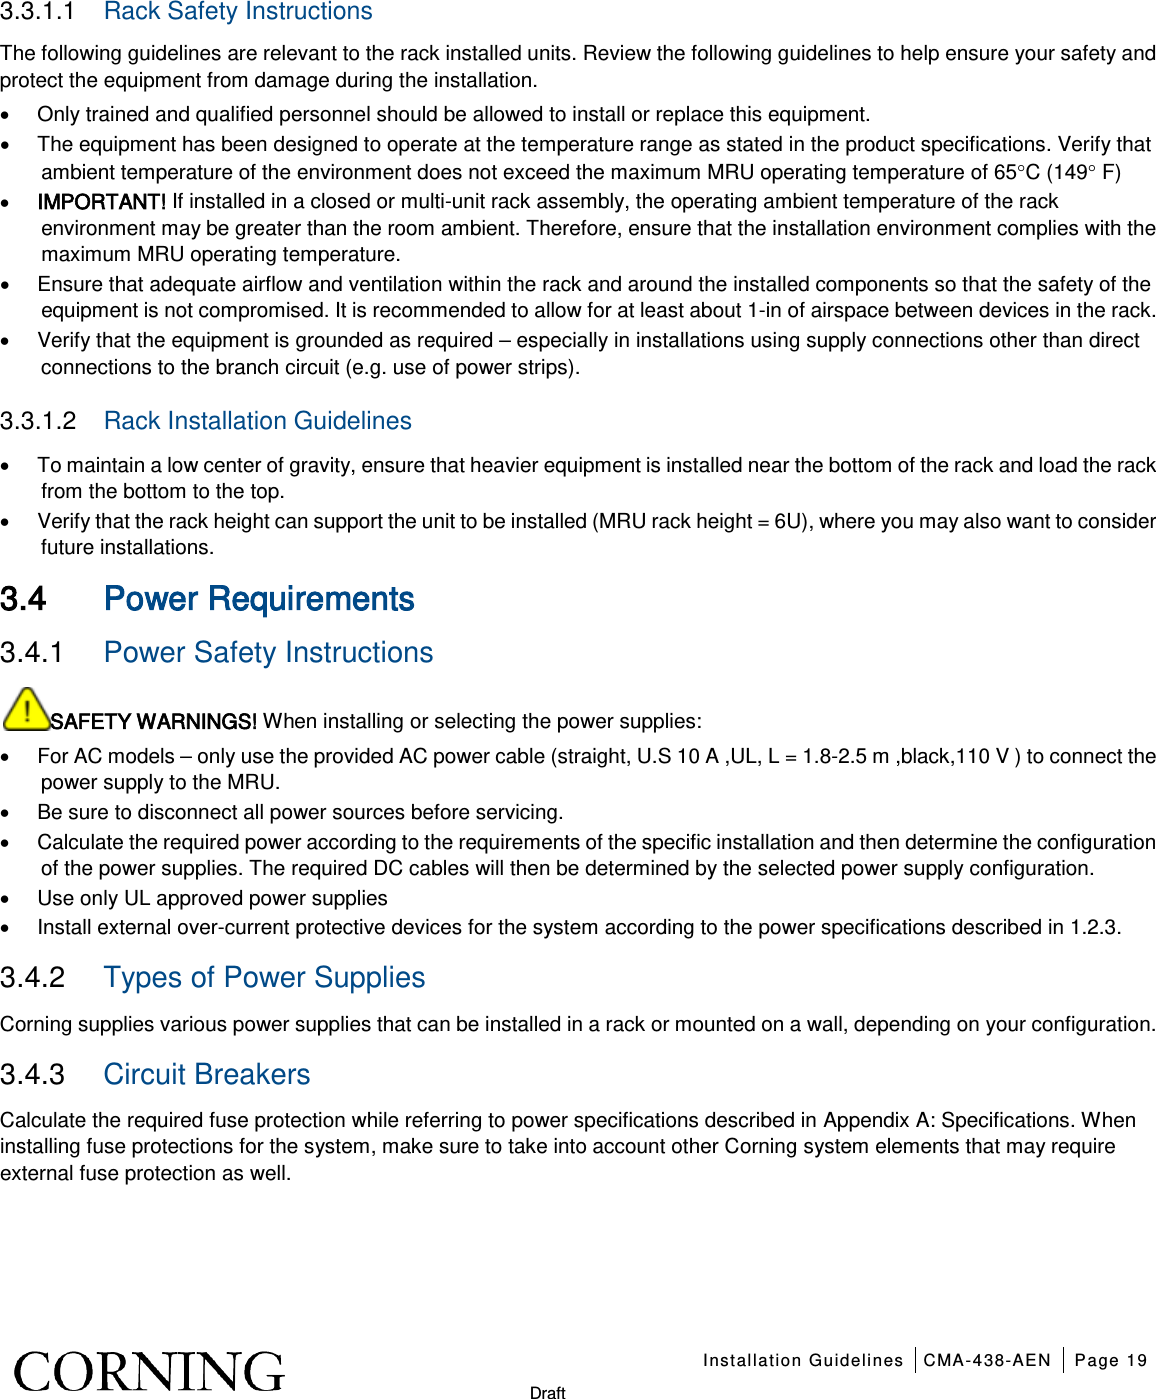    Installation Guidelines CMA-438-AEN Page 19   Draft 3.3.1.1  Rack Safety Instructions The following guidelines are relevant to the rack installed units. Review the following guidelines to help ensure your safety and protect the equipment from damage during the installation. • Only trained and qualified personnel should be allowed to install or replace this equipment. • The equipment has been designed to operate at the temperature range as stated in the product specifications. Verify that ambient temperature of the environment does not exceed the maximum MRU operating temperature of 65°C (149° F) • IMPORTANT! If installed in a closed or multi-unit rack assembly, the operating ambient temperature of the rack environment may be greater than the room ambient. Therefore, ensure that the installation environment complies with the maximum MRU operating temperature. • Ensure that adequate airflow and ventilation within the rack and around the installed components so that the safety of the equipment is not compromised. It is recommended to allow for at least about 1-in of airspace between devices in the rack. • Verify that the equipment is grounded as required – especially in installations using supply connections other than direct connections to the branch circuit (e.g. use of power strips). 3.3.1.2  Rack Installation Guidelines • To maintain a low center of gravity, ensure that heavier equipment is installed near the bottom of the rack and load the rack from the bottom to the top. • Verify that the rack height can support the unit to be installed (MRU rack height = 6U), where you may also want to consider future installations.    3.4 Power Requirements 3.4.1  Power Safety Instructions SAFETY WARNINGS! When installing or selecting the power supplies:   • For AC models – only use the provided AC power cable (straight, U.S 10 A ,UL, L = 1.8-2.5 m ,black,110 V ) to connect the power supply to the MRU. • Be sure to disconnect all power sources before servicing. • Calculate the required power according to the requirements of the specific installation and then determine the configuration of the power supplies. The required DC cables will then be determined by the selected power supply configuration. • Use only UL approved power supplies   • Install external over-current protective devices for the system according to the power specifications described in  1.2.3. 3.4.2  Types of Power Supplies Corning supplies various power supplies that can be installed in a rack or mounted on a wall, depending on your configuration.     3.4.3  Circuit Breakers Calculate the required fuse protection while referring to power specifications described in Appendix A: Specifications. When installing fuse protections for the system, make sure to take into account other Corning system elements that may require external fuse protection as well.  